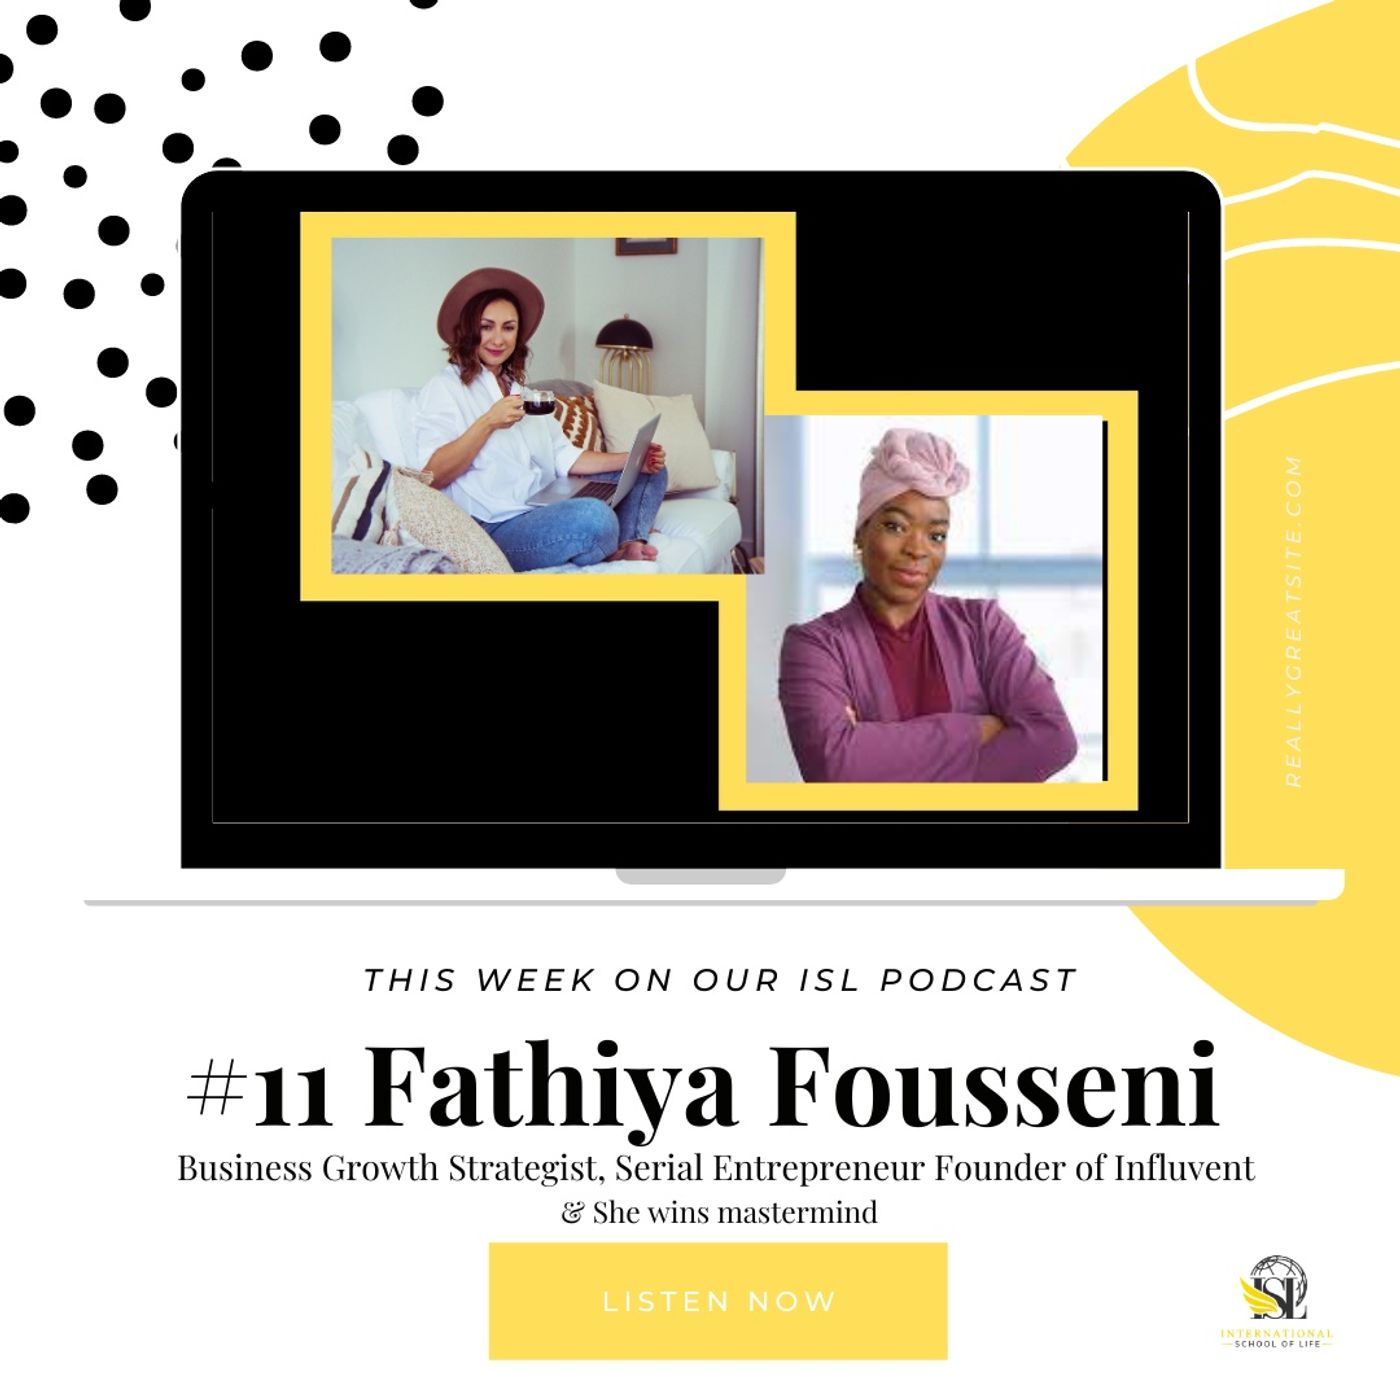 #11 - Interview with Fathiya Fousseni - Business Strategist & Founder of SHE WINS mastermind